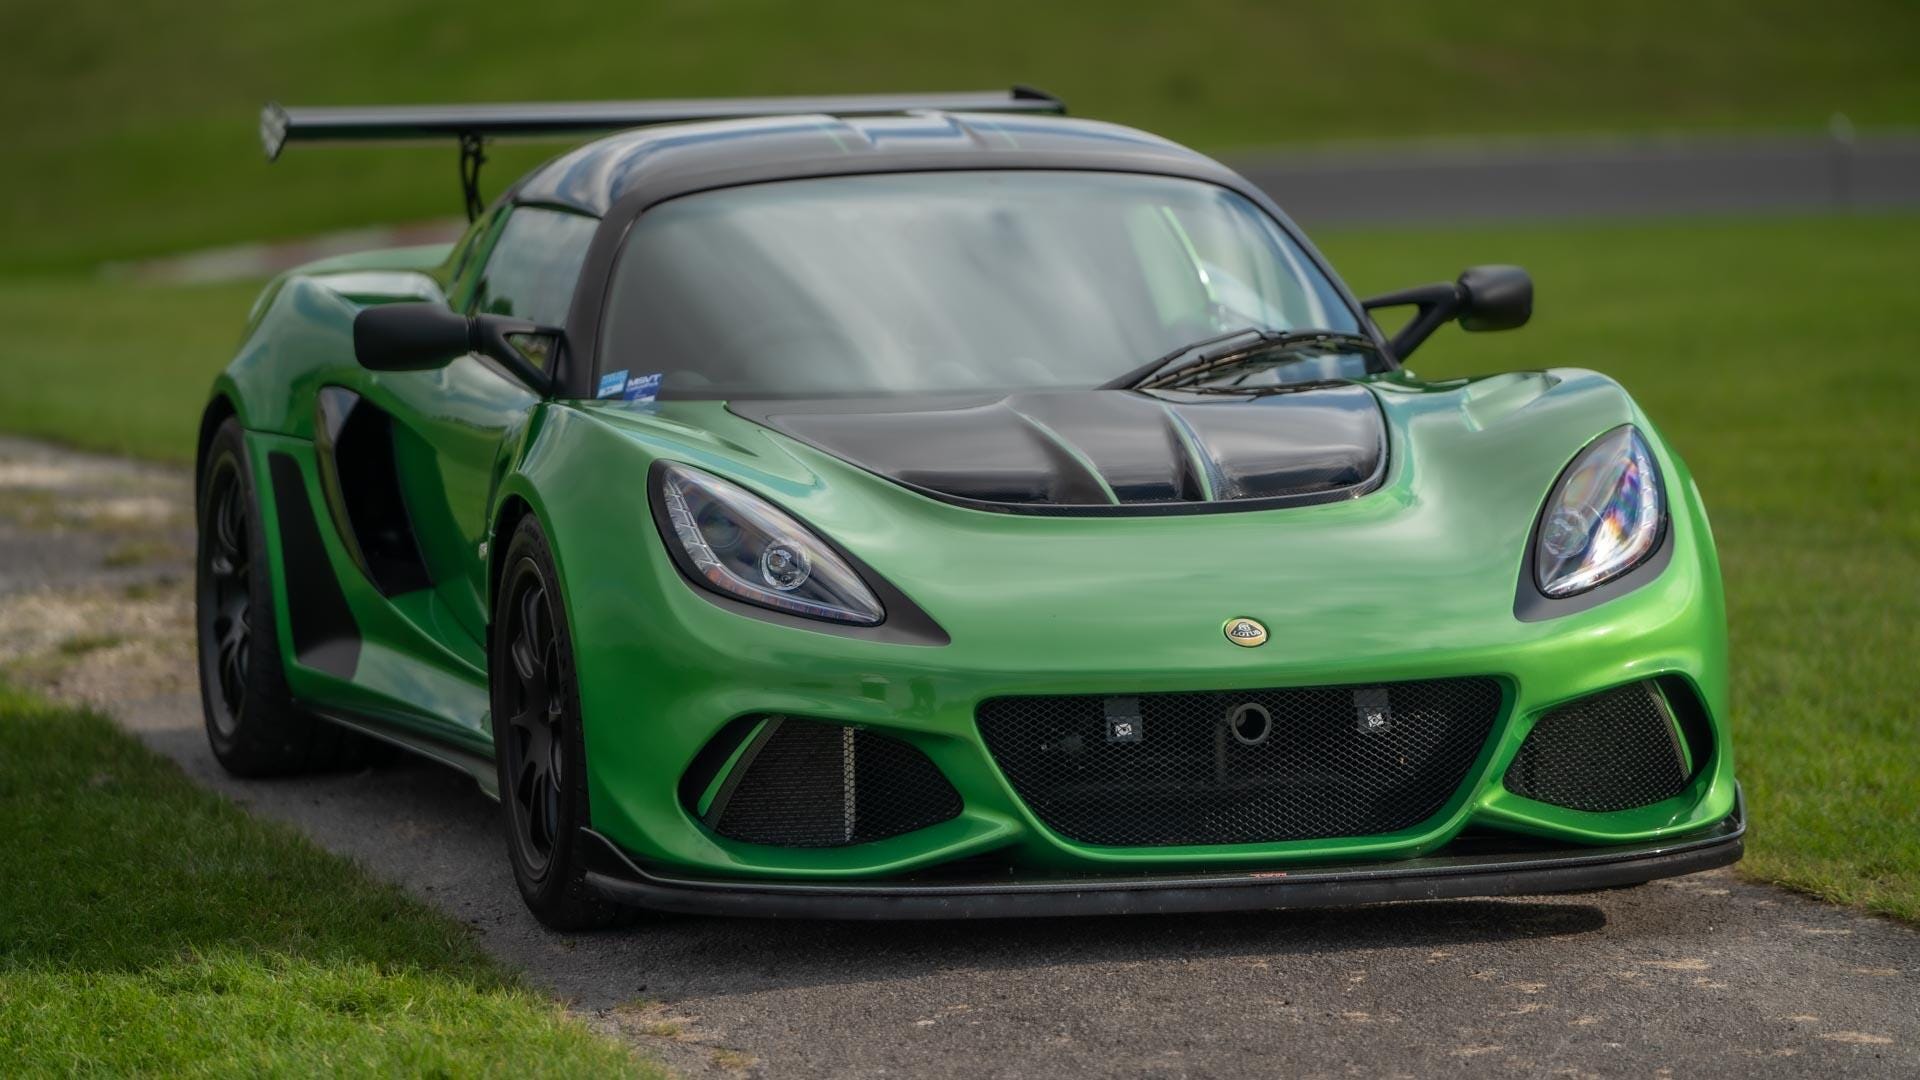 Lotus Exige Cup 430 and Cadwell Park race circuit are a perfect